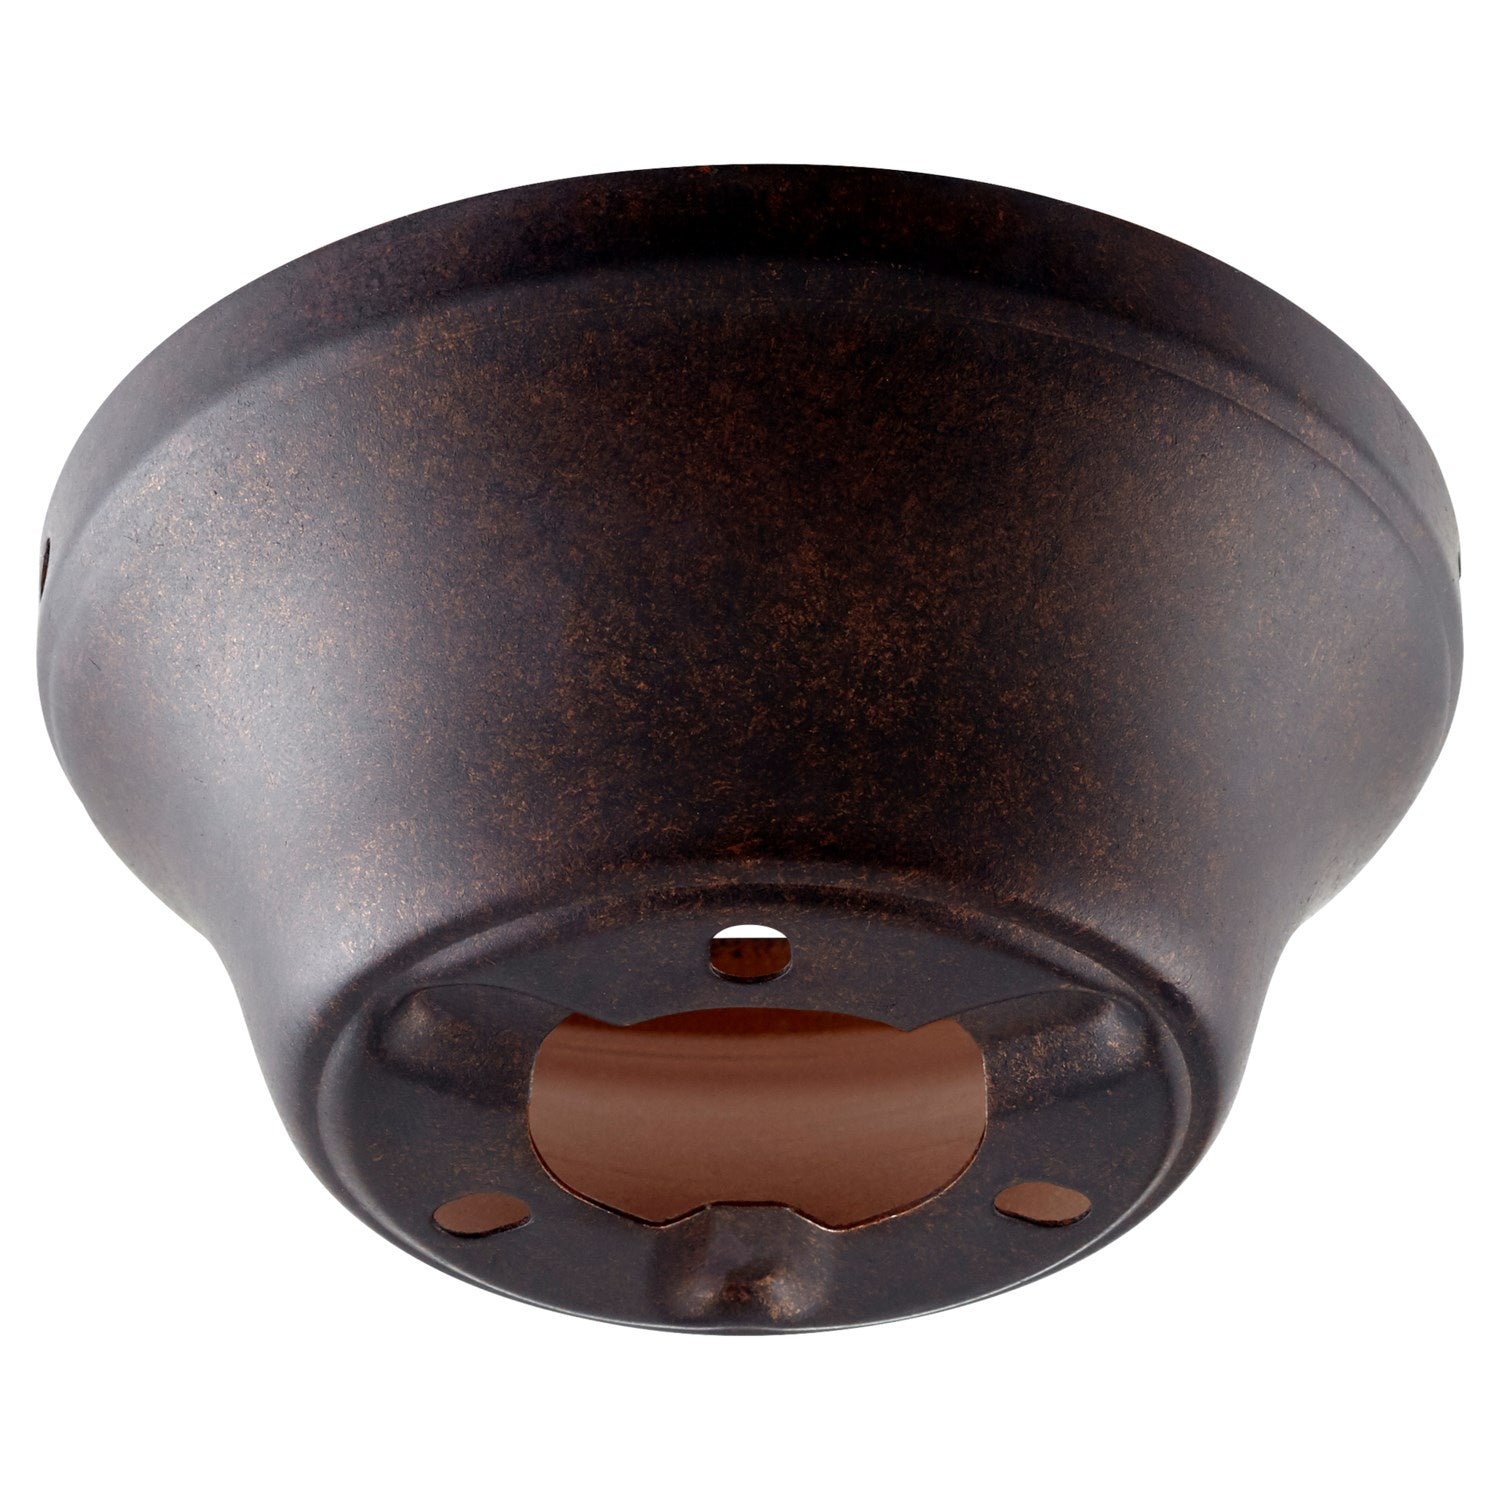 Quorum 7-1600-44 Fan Adapter - Toasted Sienna